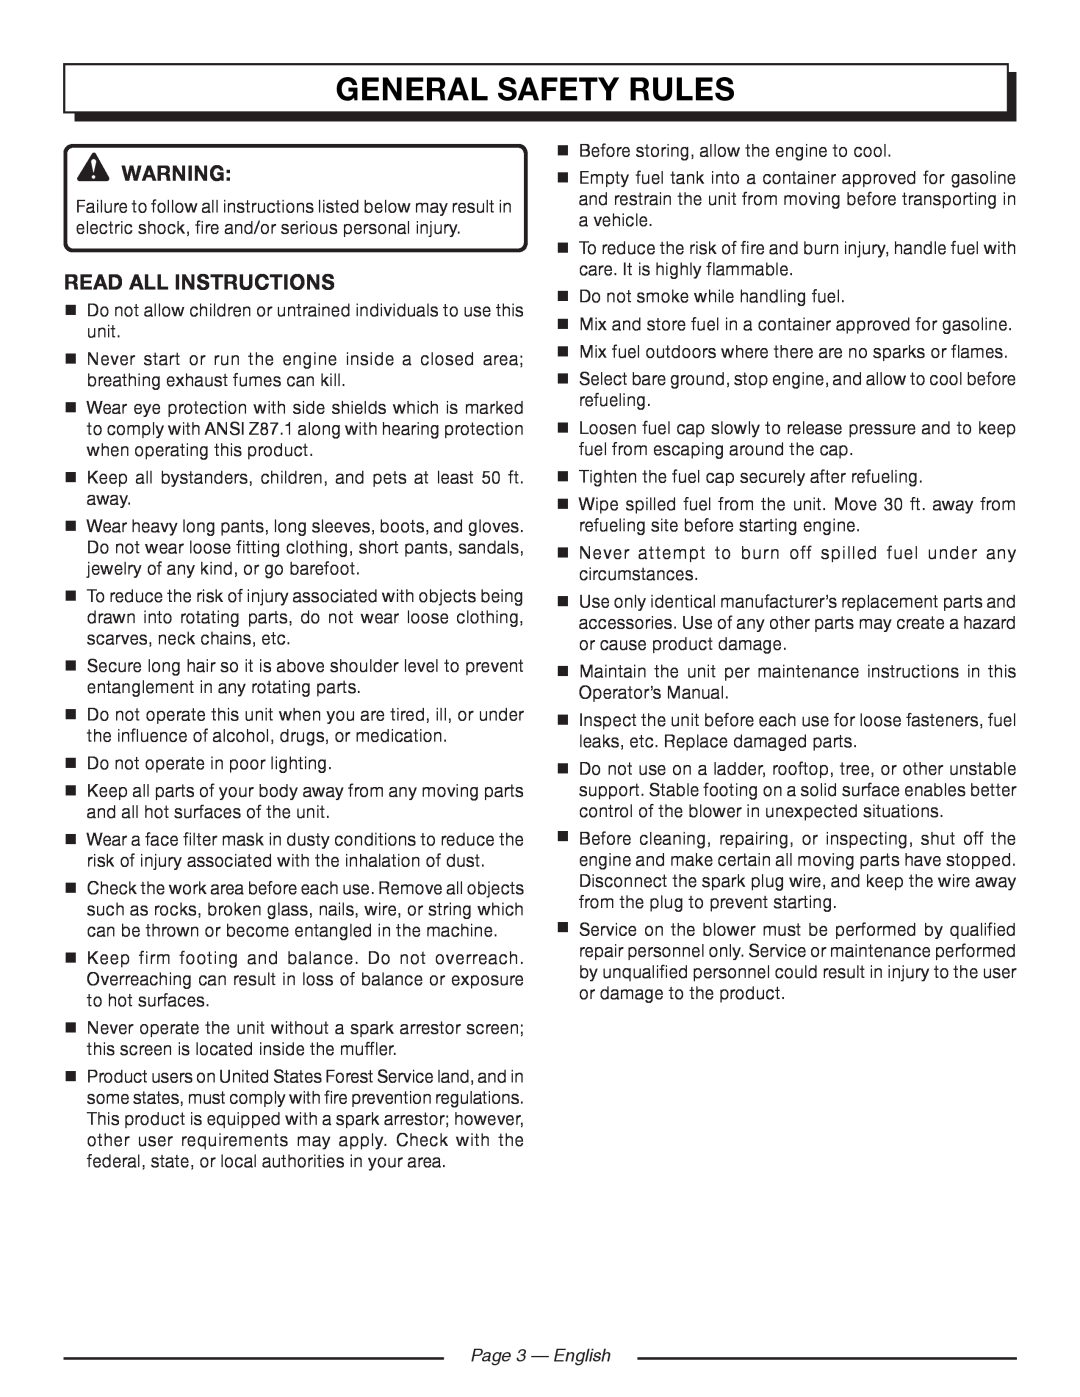 Homelite UT09520 manuel dutilisation General Safety Rules, Read All Instructions, Page 3 - English 